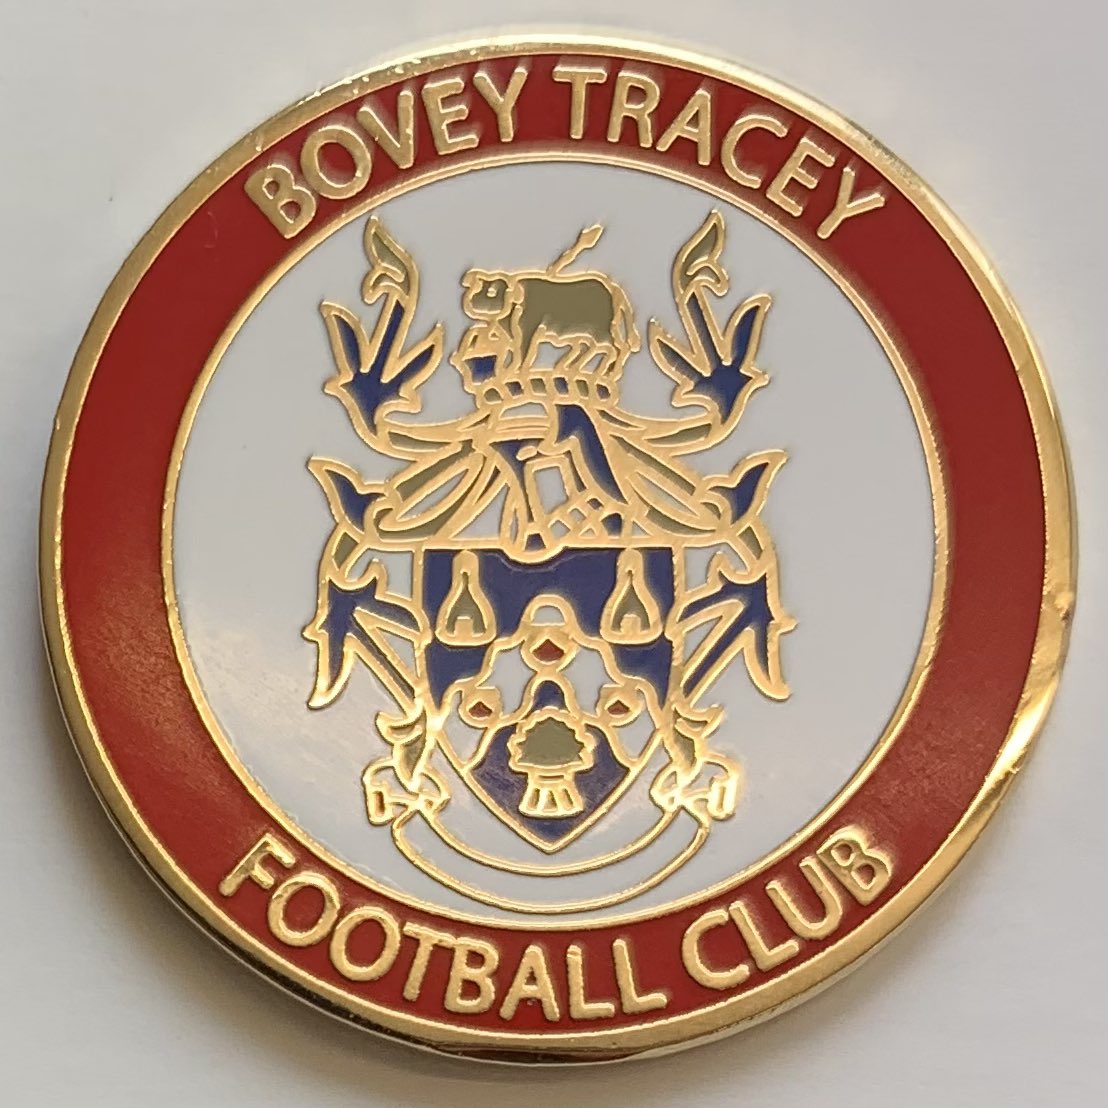 New for Bovey Tracey FC.